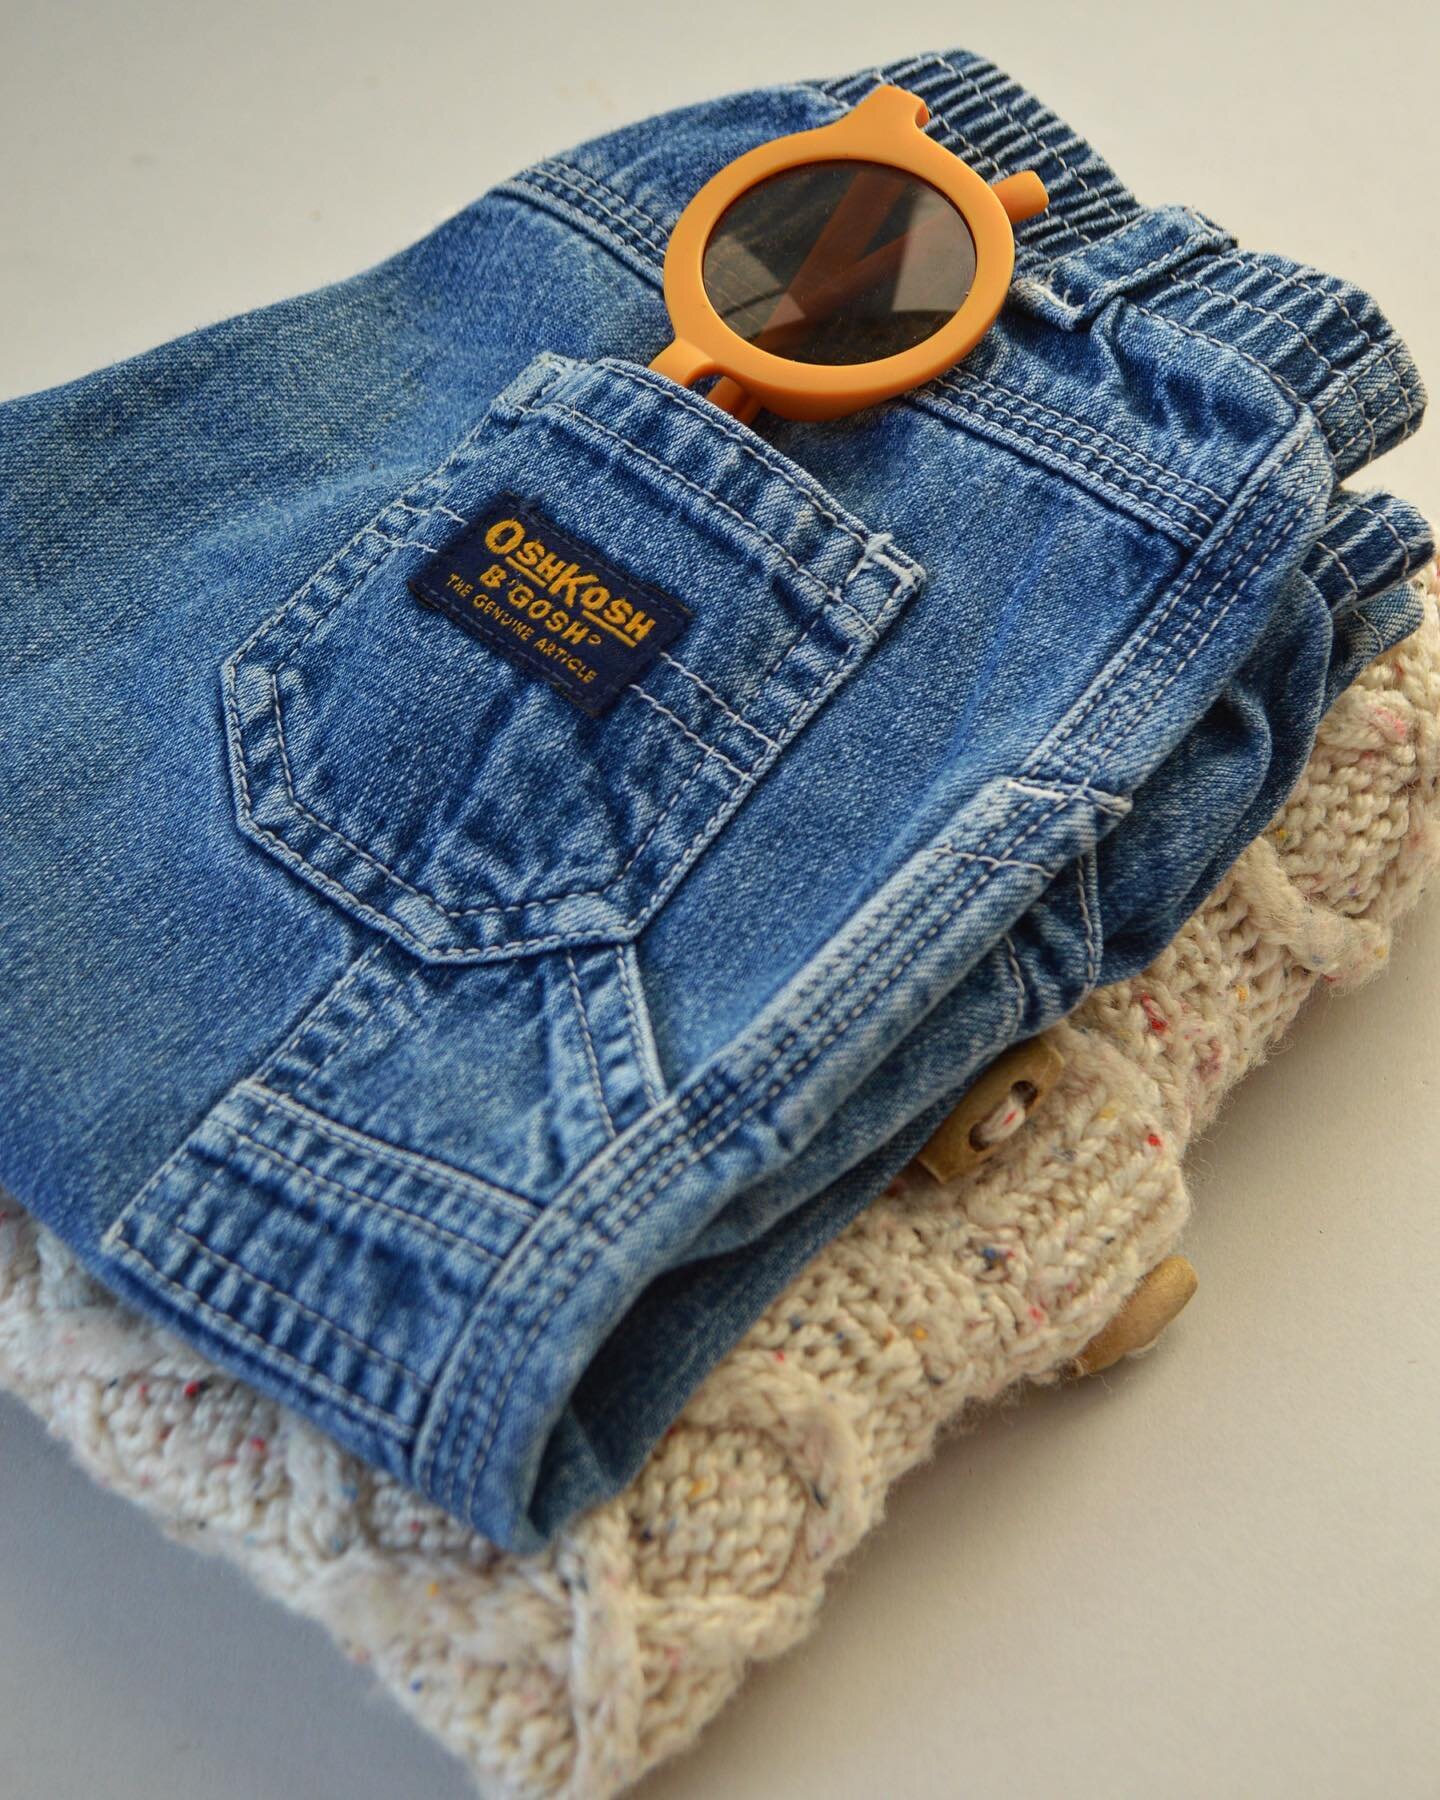 Vintage Oshkosh B&rsquo;gosh jeans~ my all time favourite style 💙👌🏼🤍 
Even better with a handknit + sunnies 😎